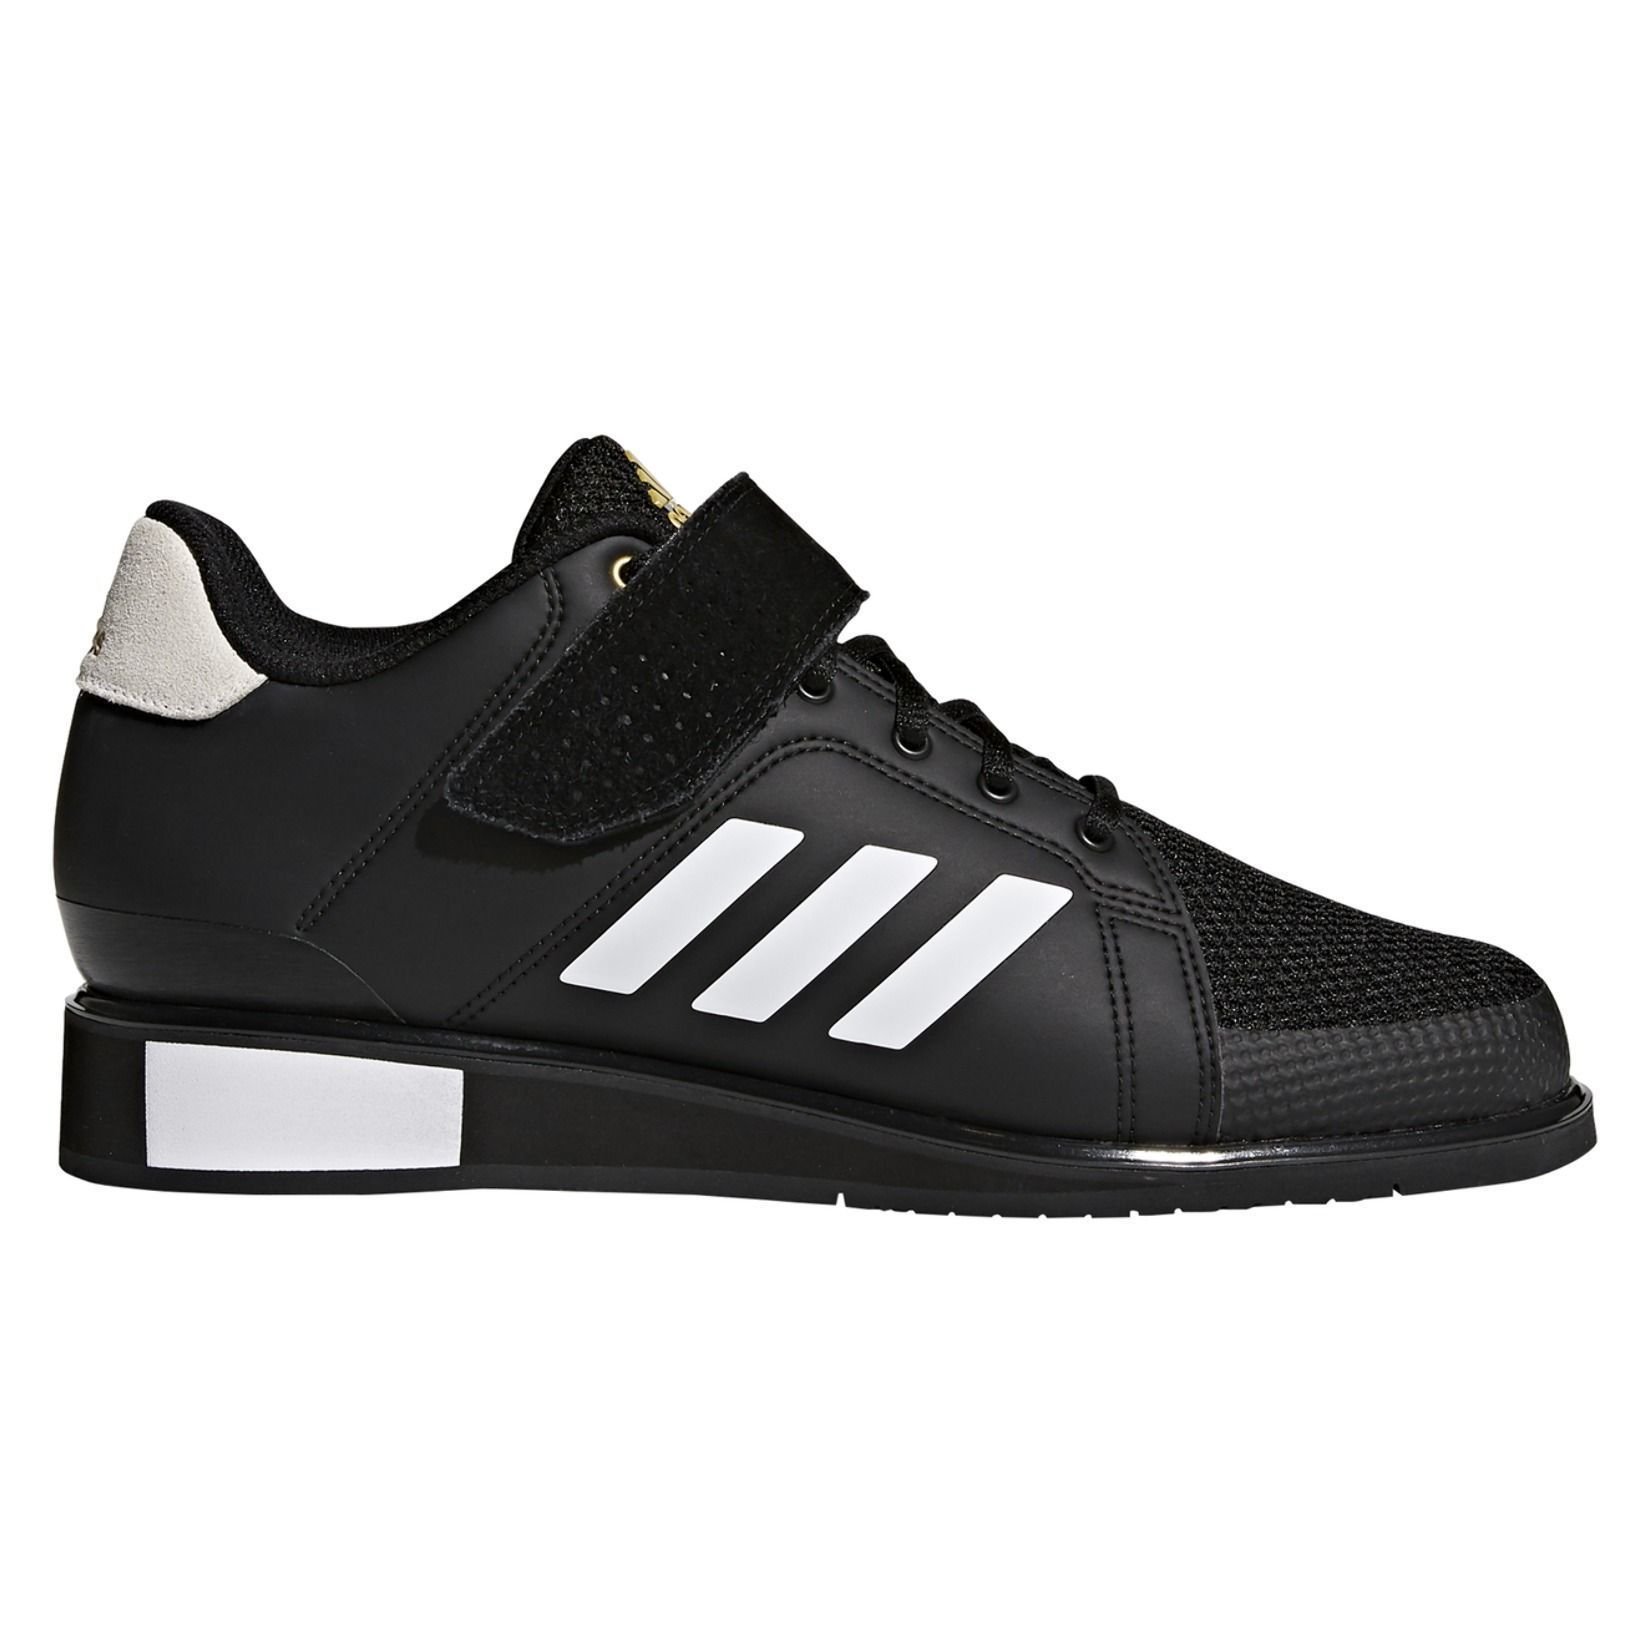 adidas power perfect 3 weightlifting shoes